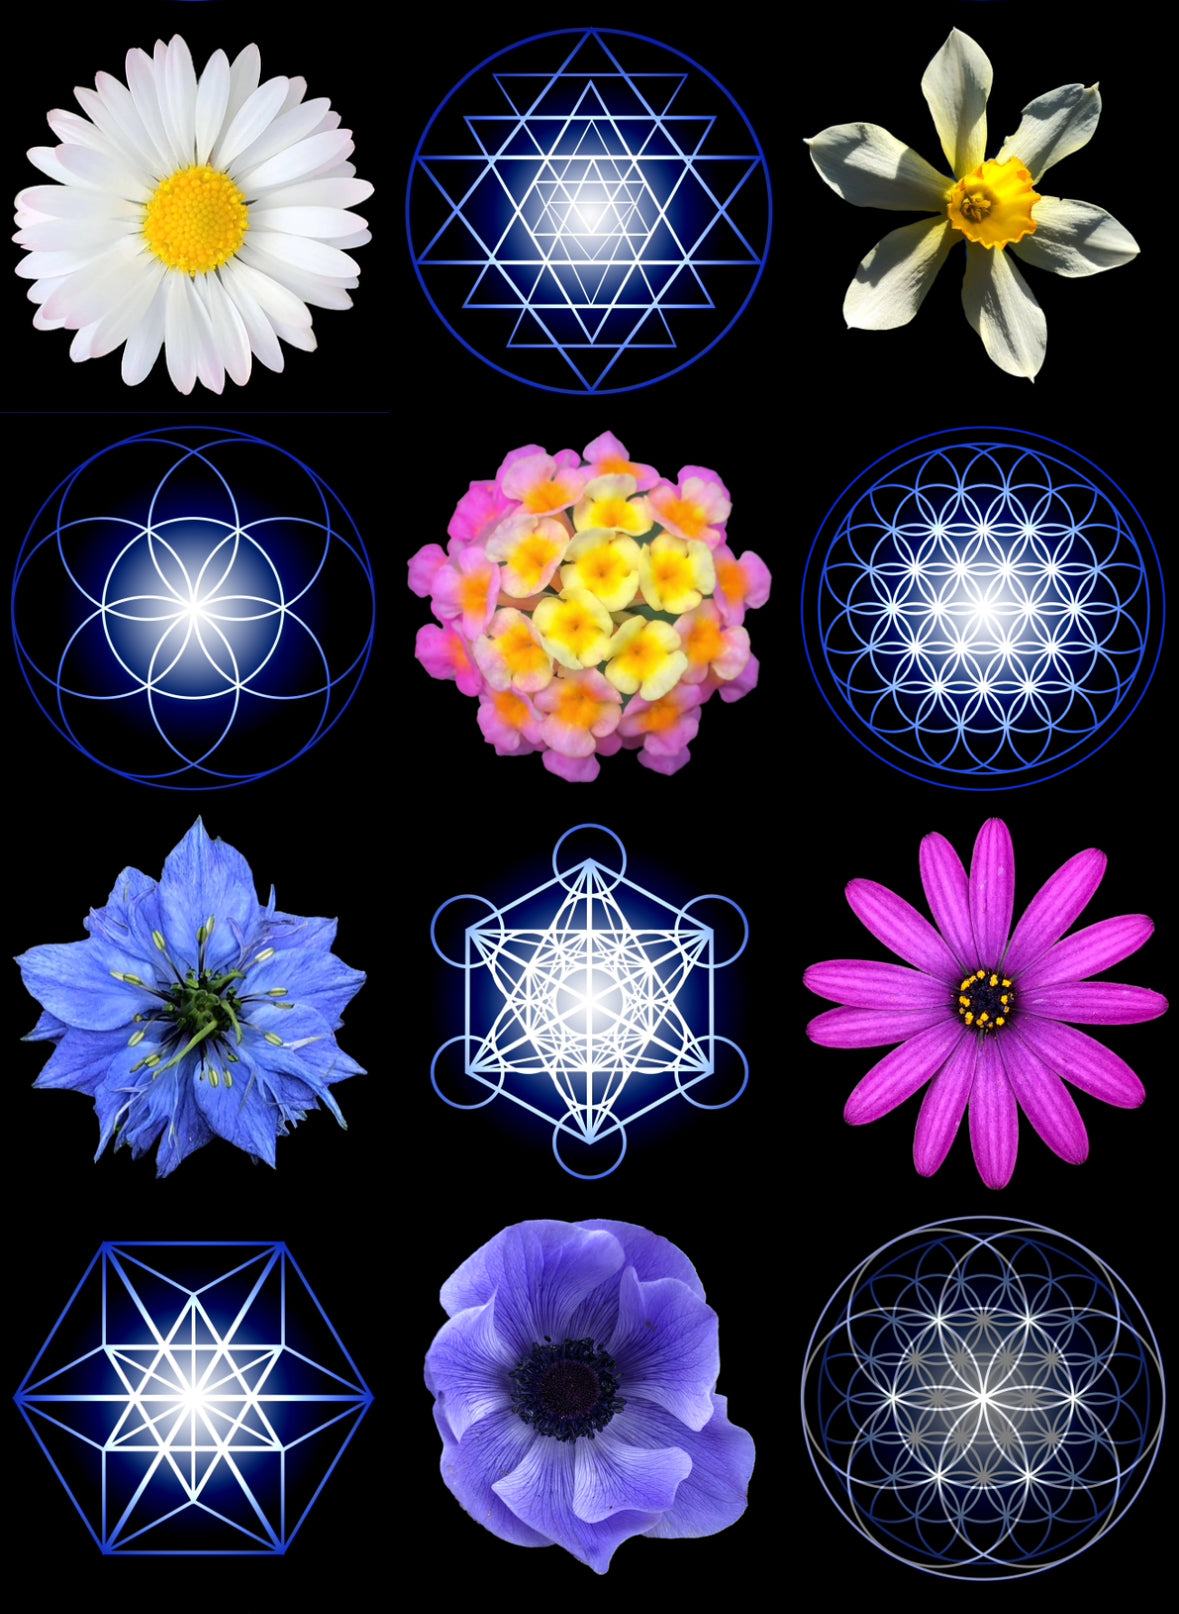 Sacred geometry and Nature art by Quentin Carpenter